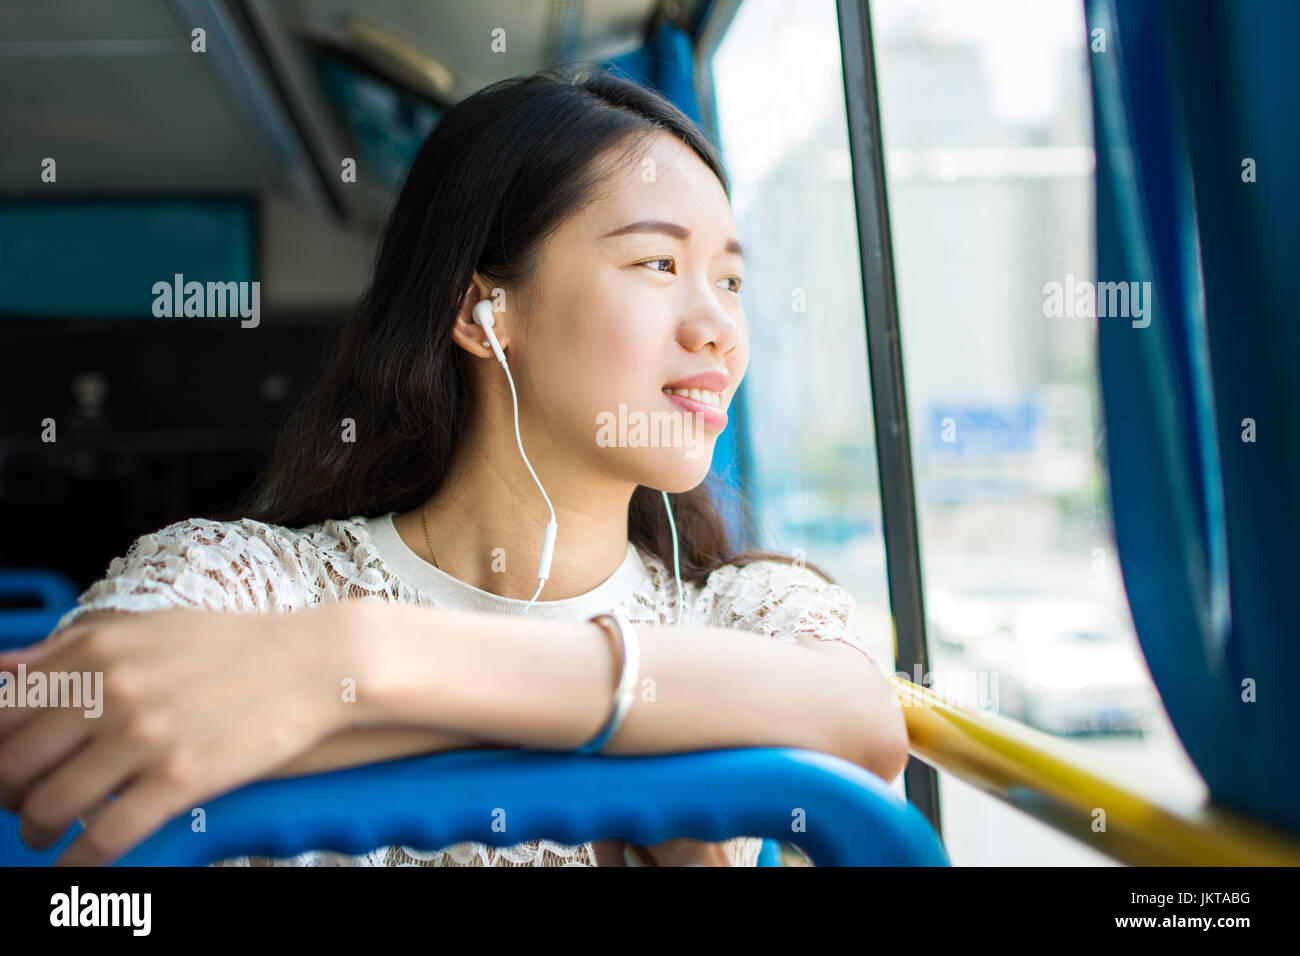 Girl listening to music on a public bus ride Stock Photo